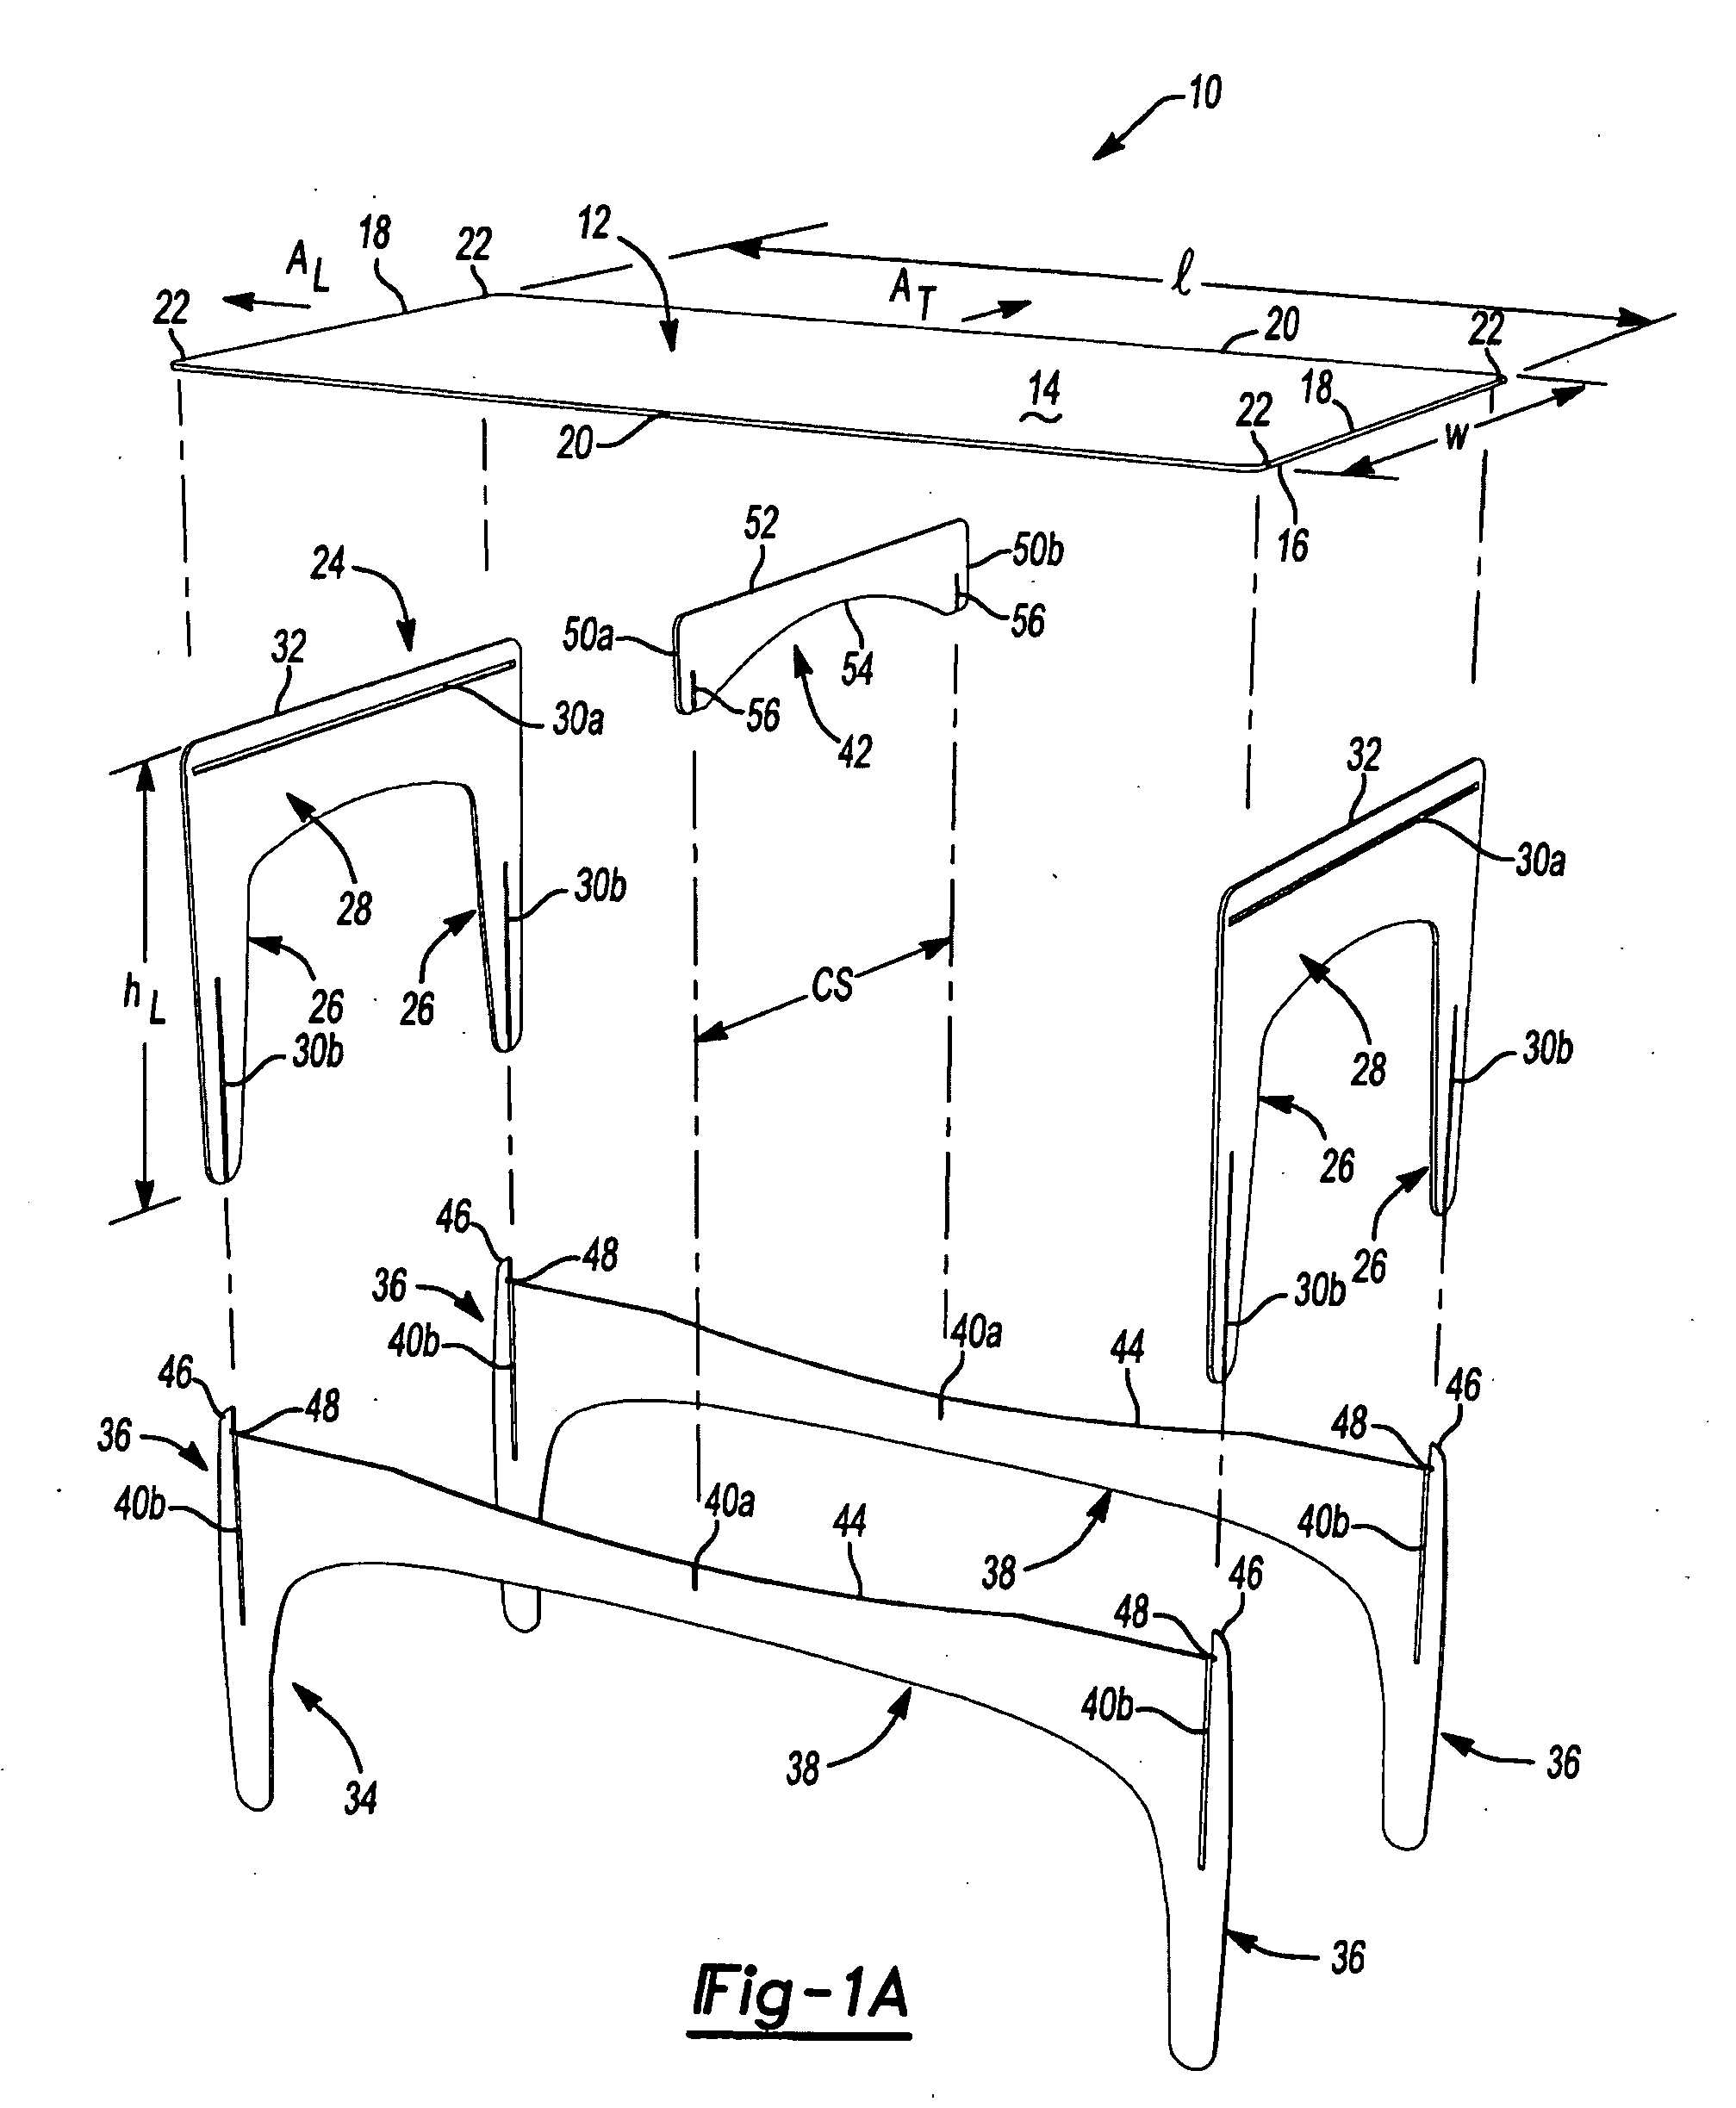 Flat pack friction fit furniture system